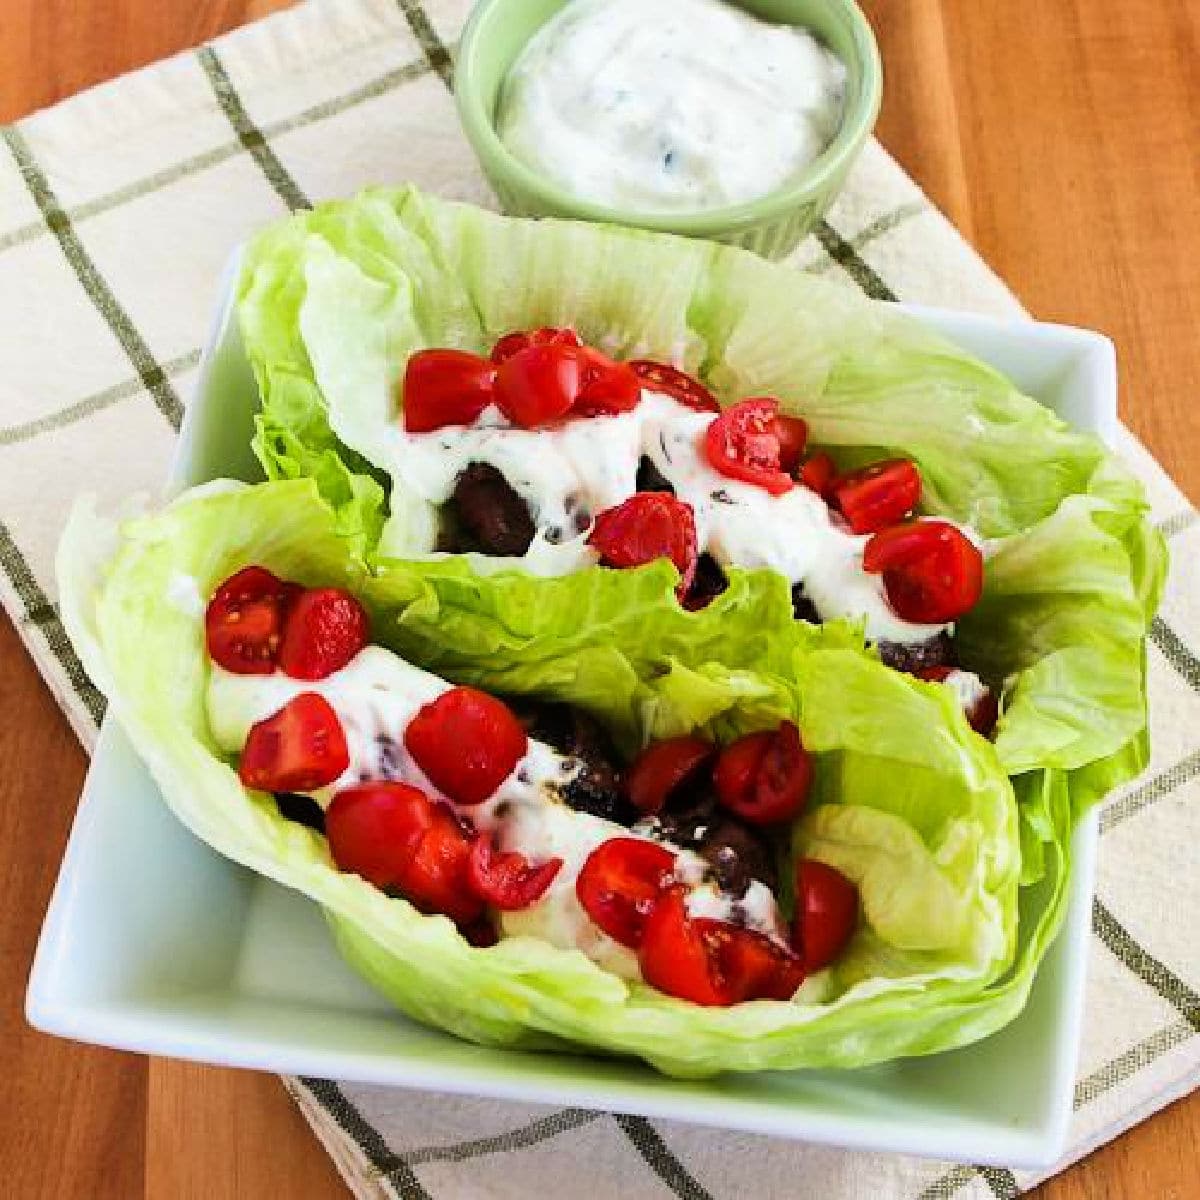 Ground Beef Gyro Meatball Lettuce Wraps shown with two lettuce wraps in serving dish.